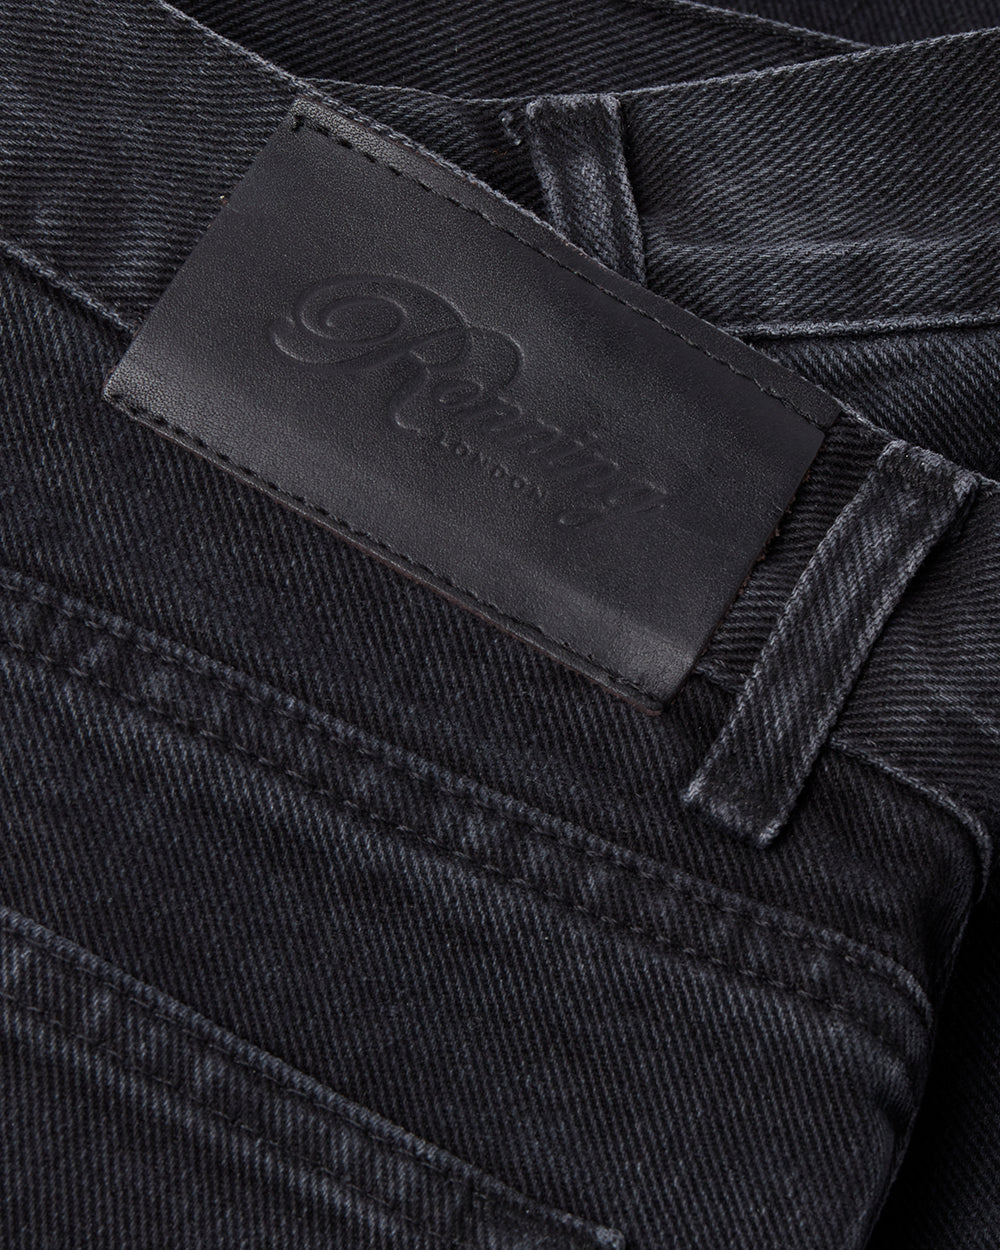 Classic Jeans - Washed Black